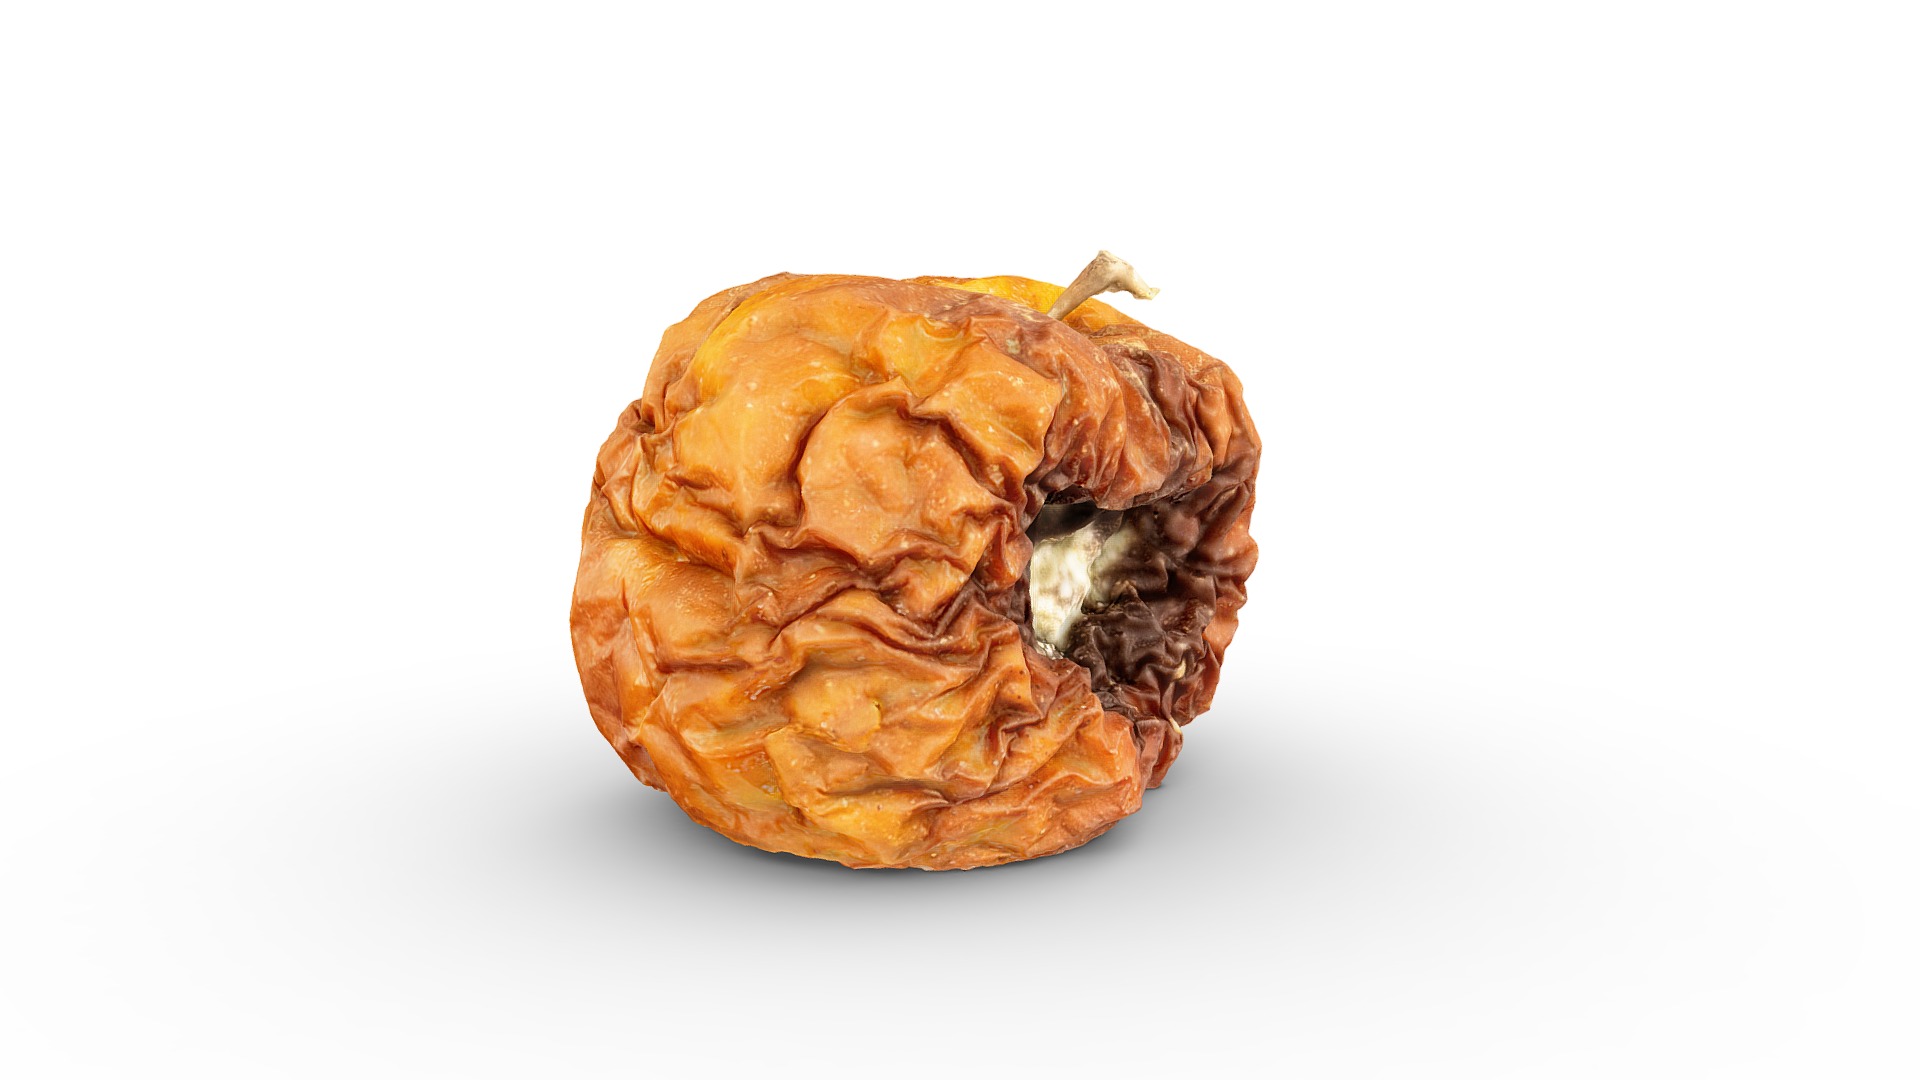 3D model Rotten apple #1 - This is a 3D model of the Rotten apple #1. The 3D model is about a brown and white fruit.